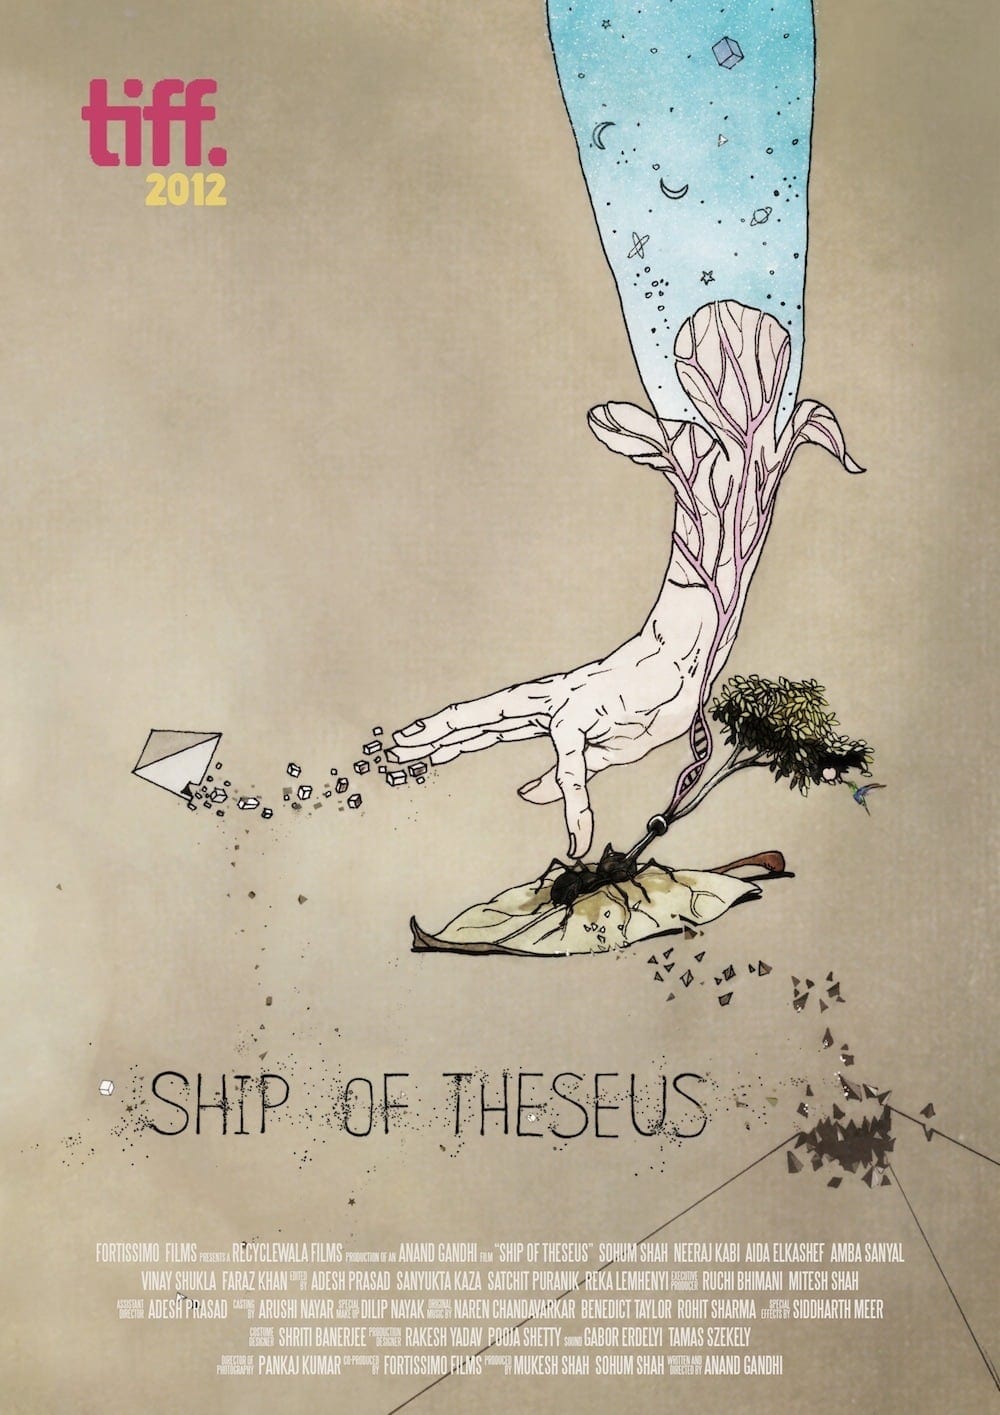 Poster for the movie "Ship of Theseus"